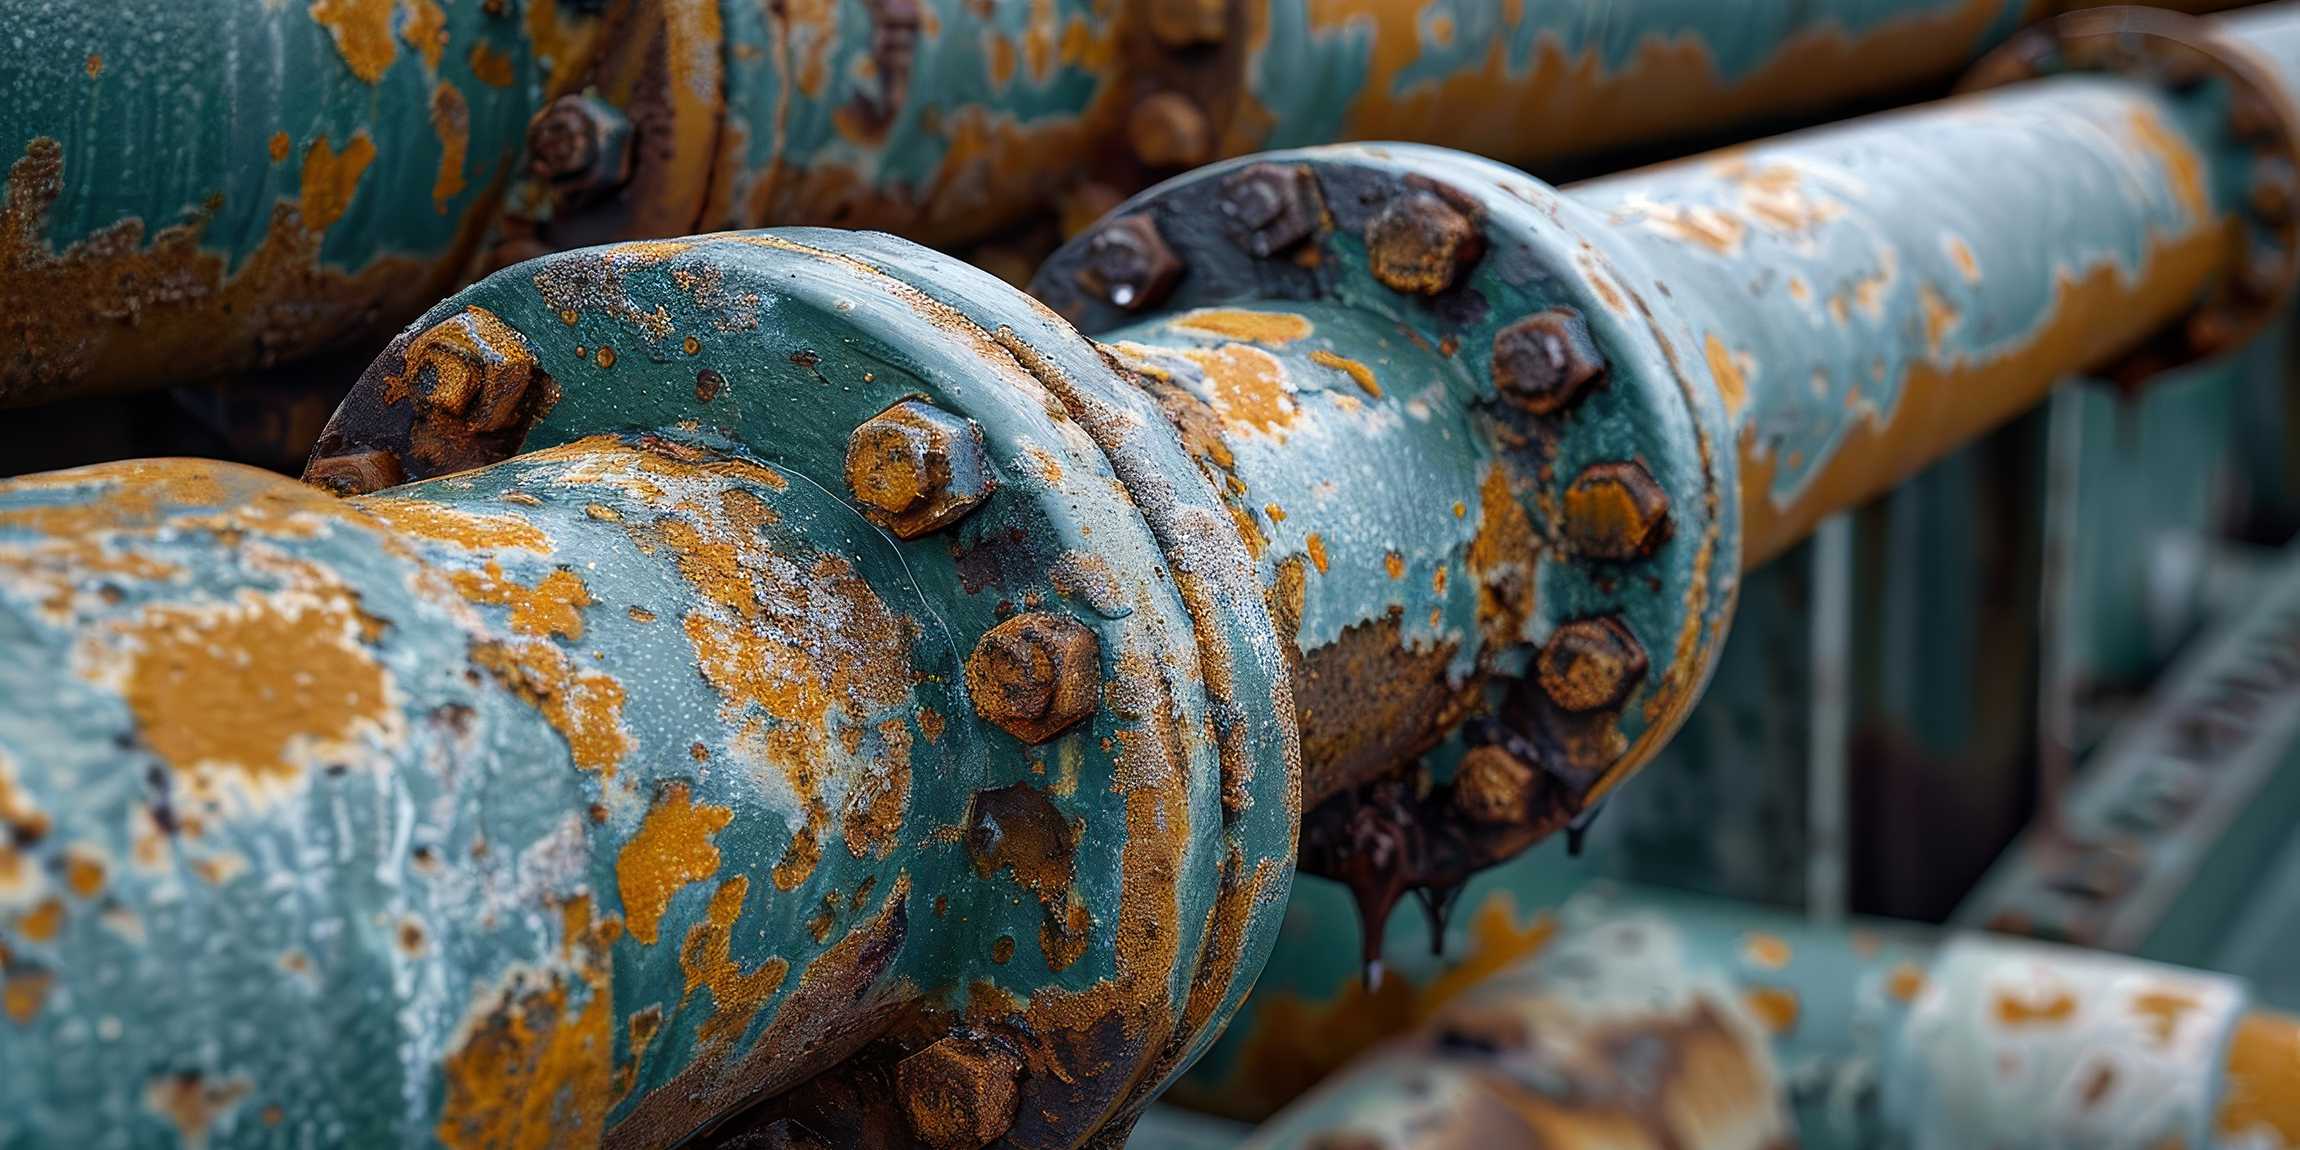 Rusty pipes